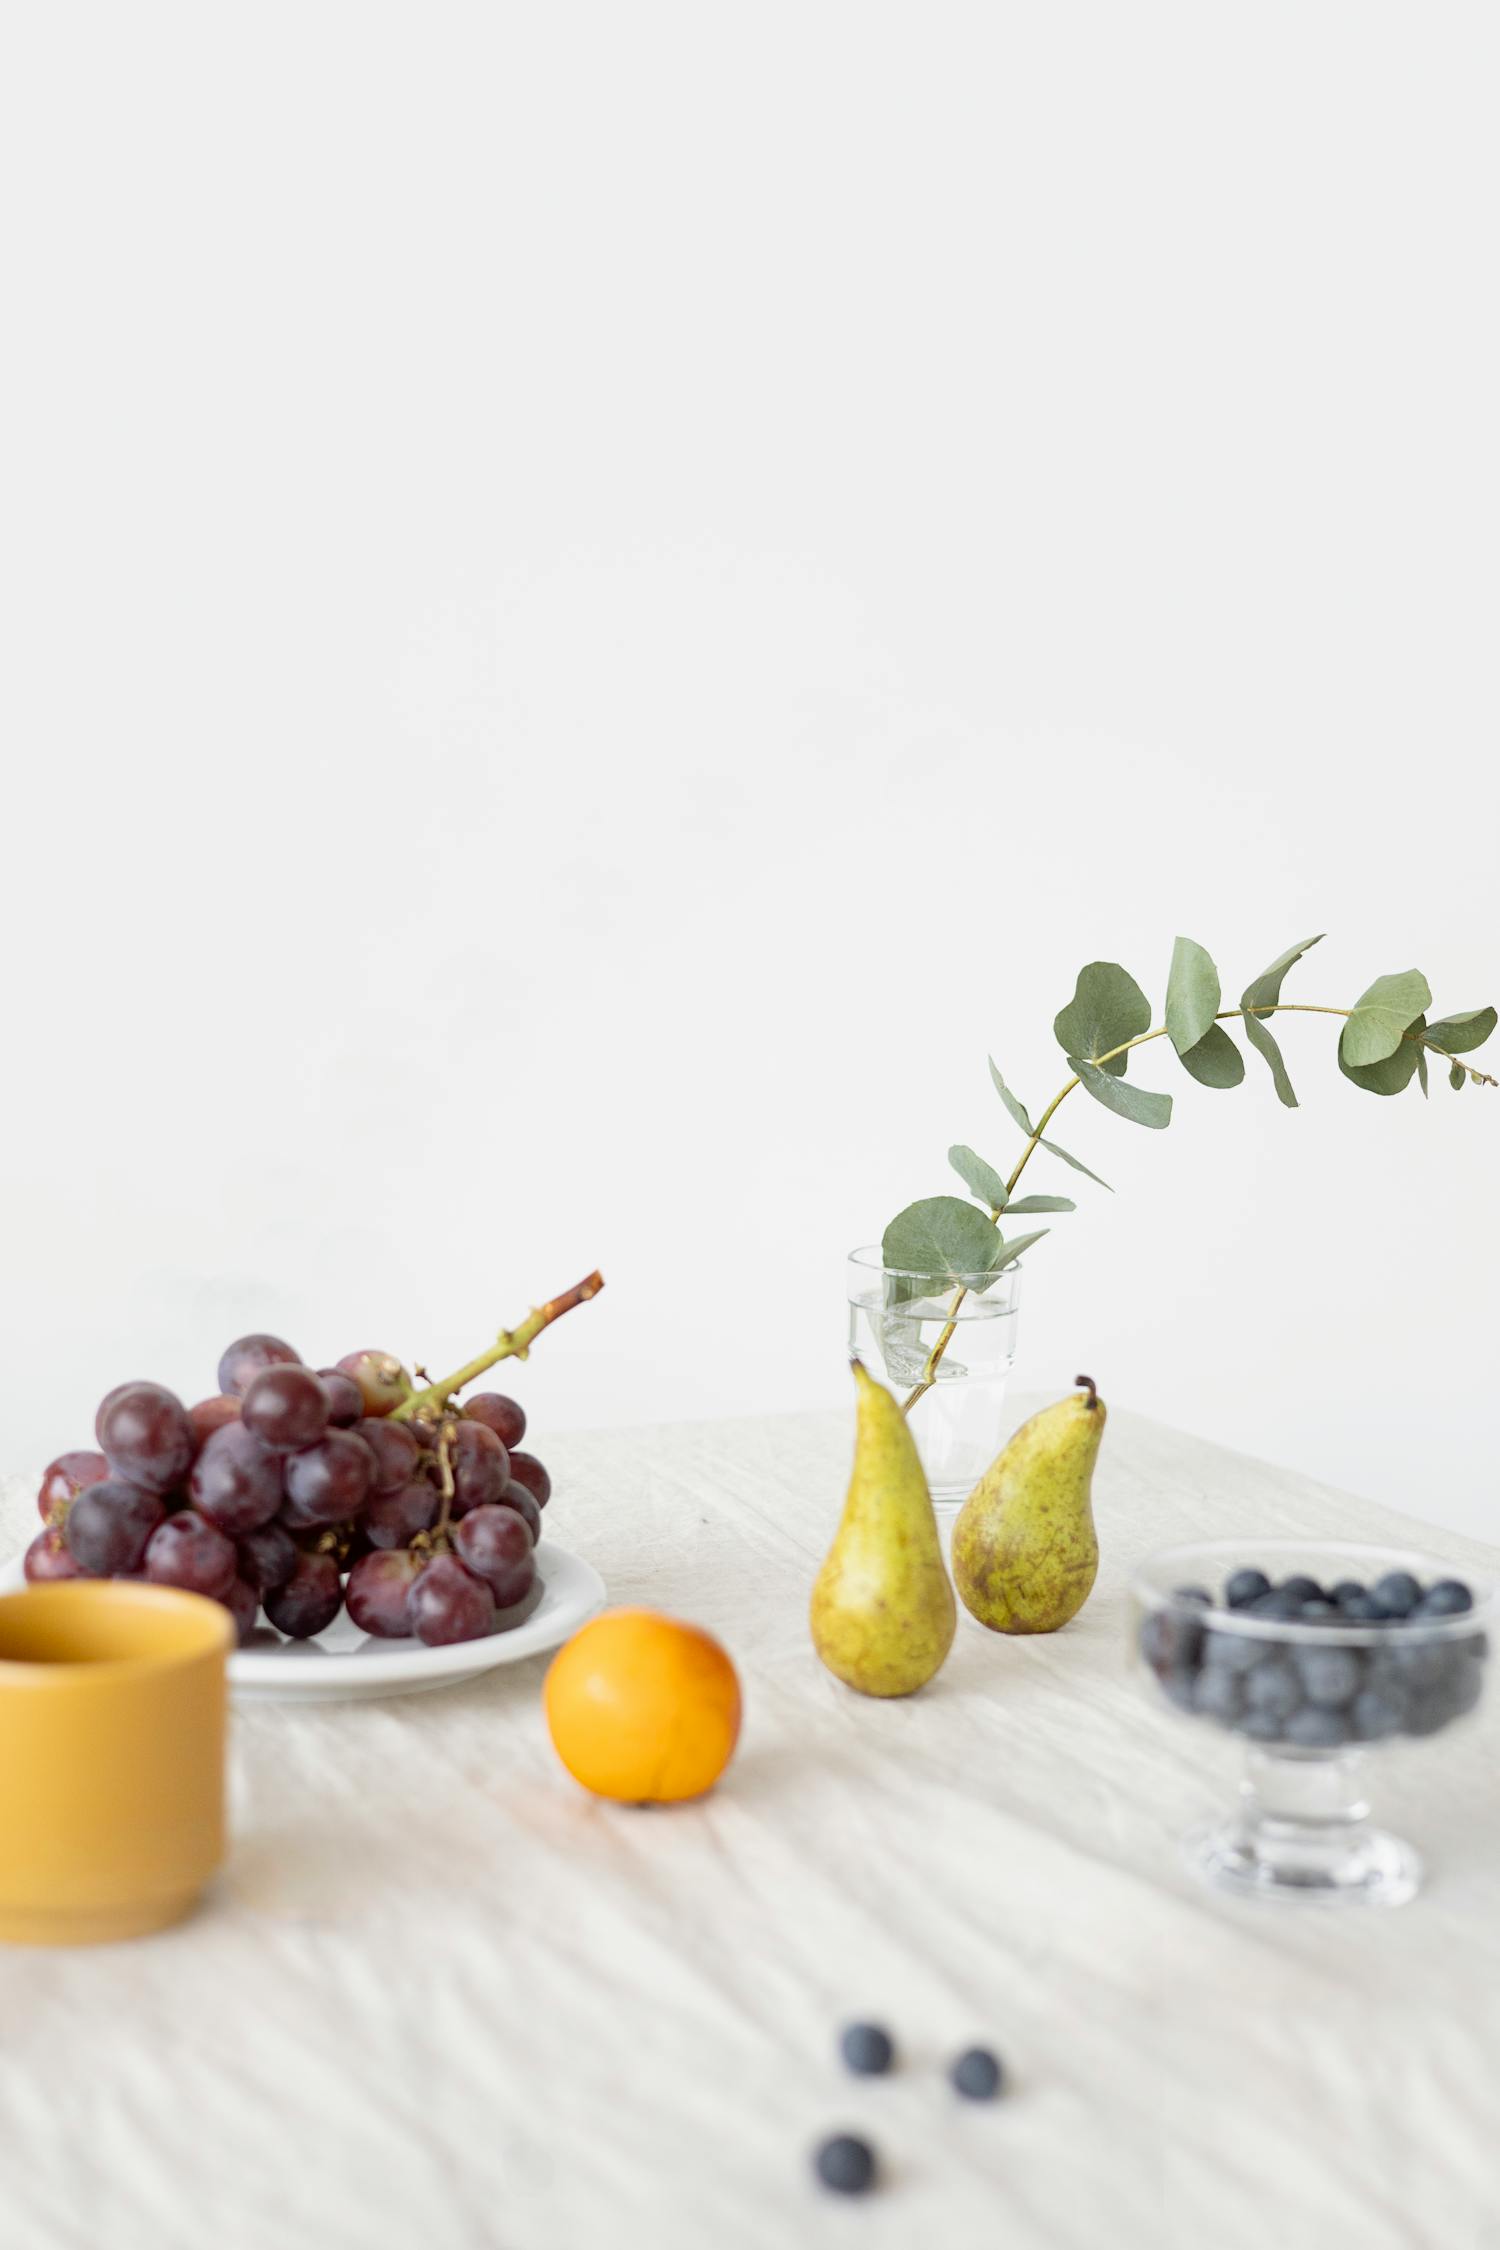 Yellow Lemon and Purple Grapes on White Table · Free Stock Photo